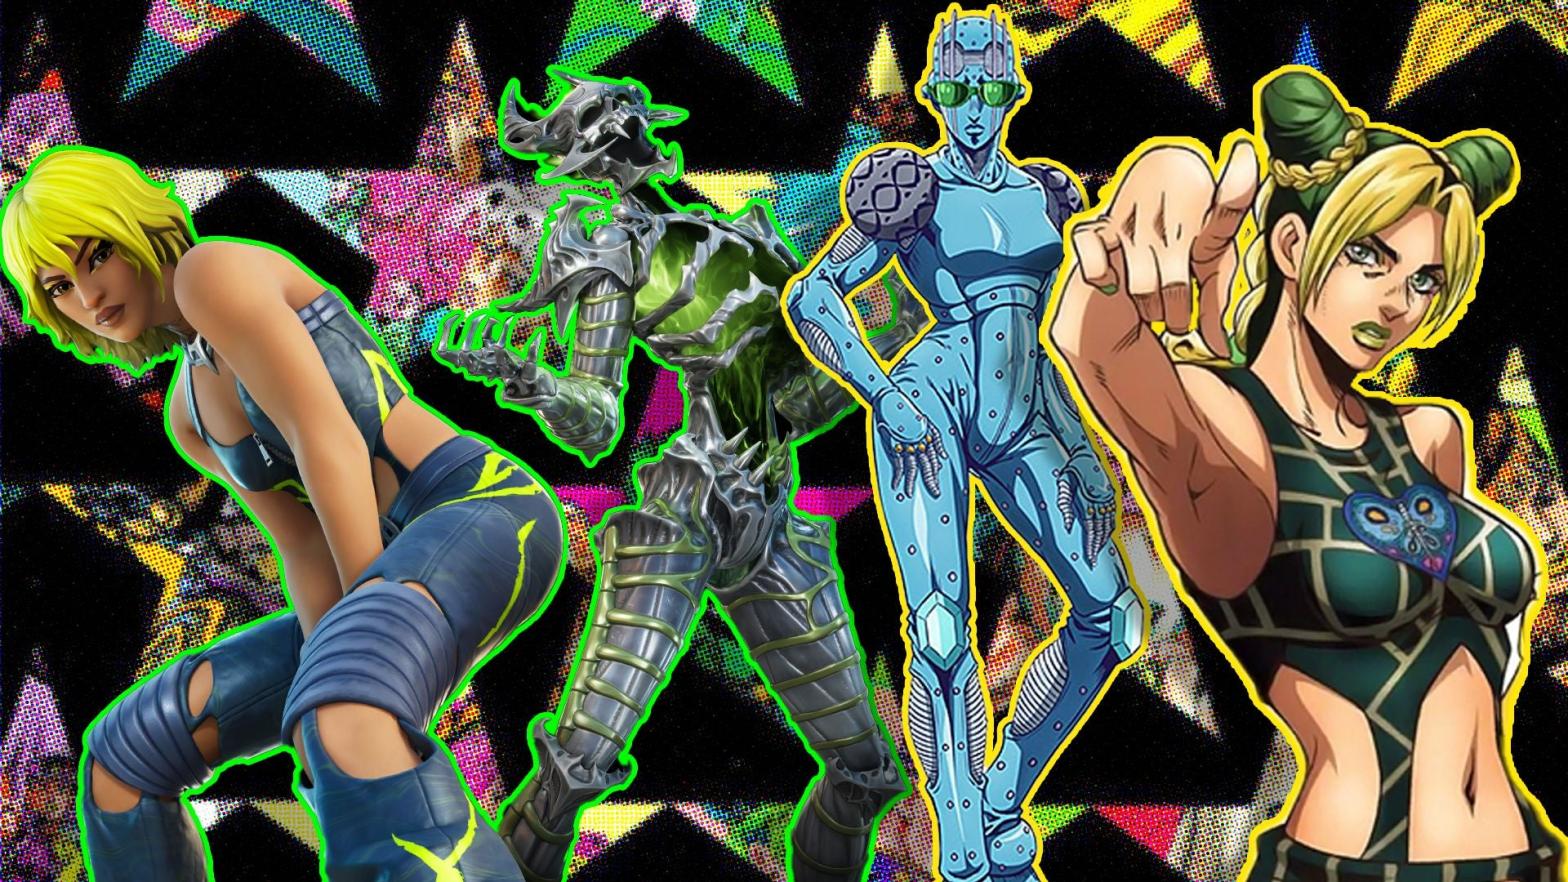 I'm seeing double. Must be the work of an enemy Stand. (Image: Epic Games / David Production / Shueisha / Netflix / Kotaku)